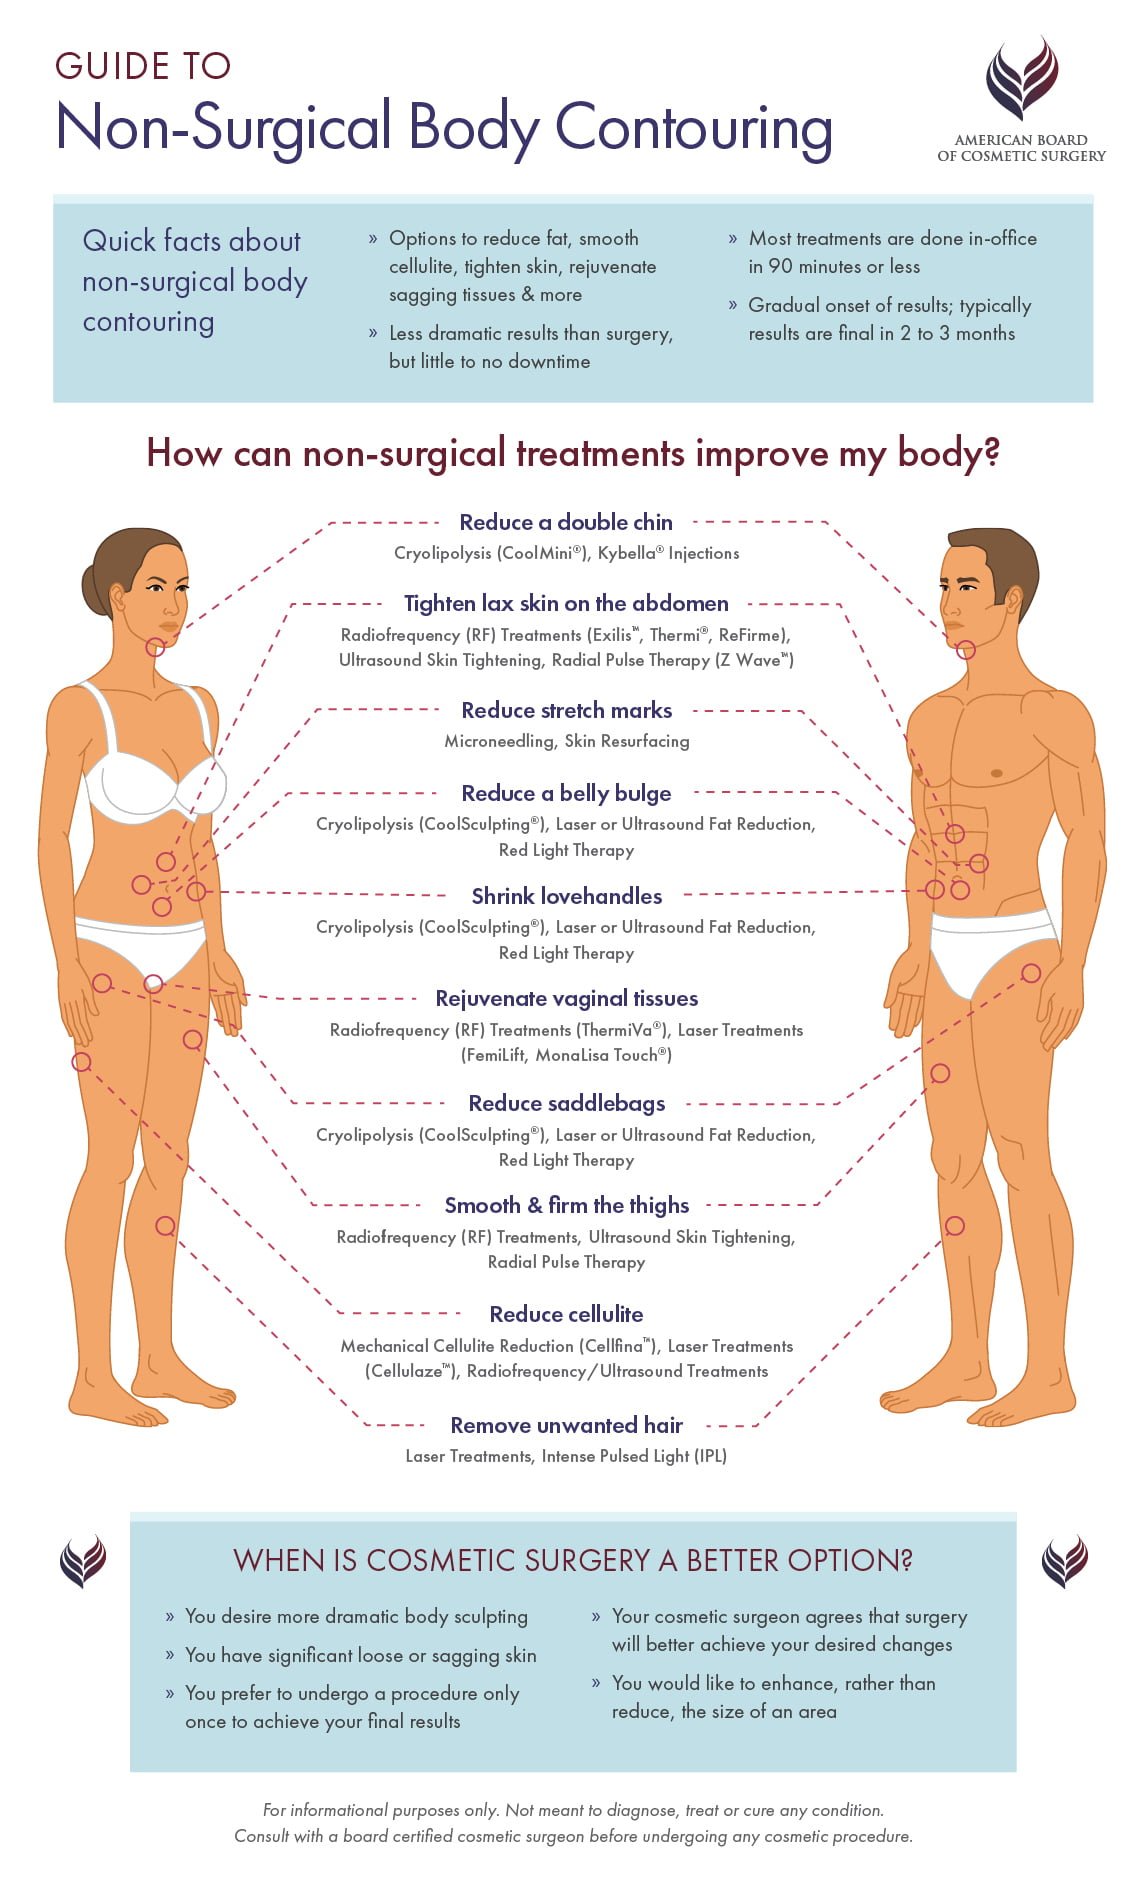 Guide to non-surgical body contouring treatments